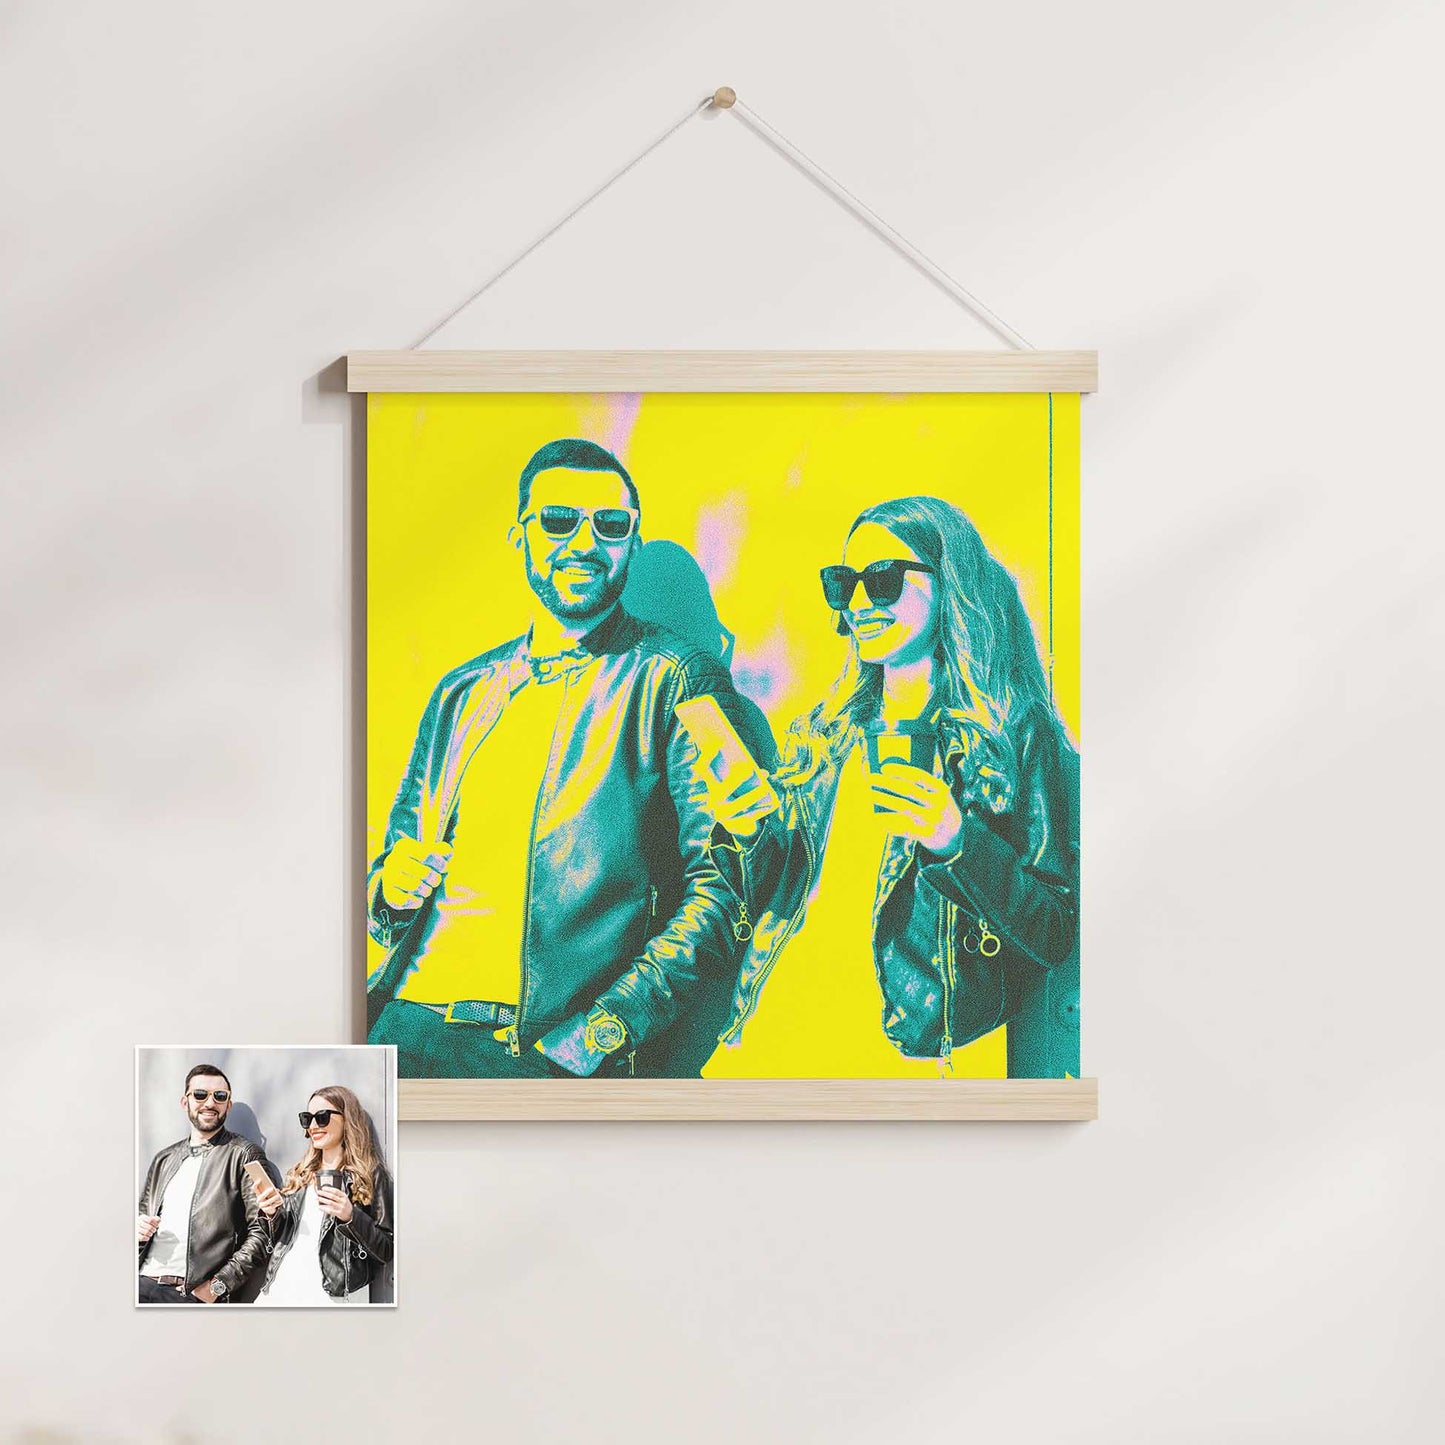 Elevate your space with our Personalised Acid Colours Poster Hanger. The vibrant yellow, green, and teal options bring a cool and lively ambiance to any room. Made with gallery-quality paper and a natural wood magnetic frame